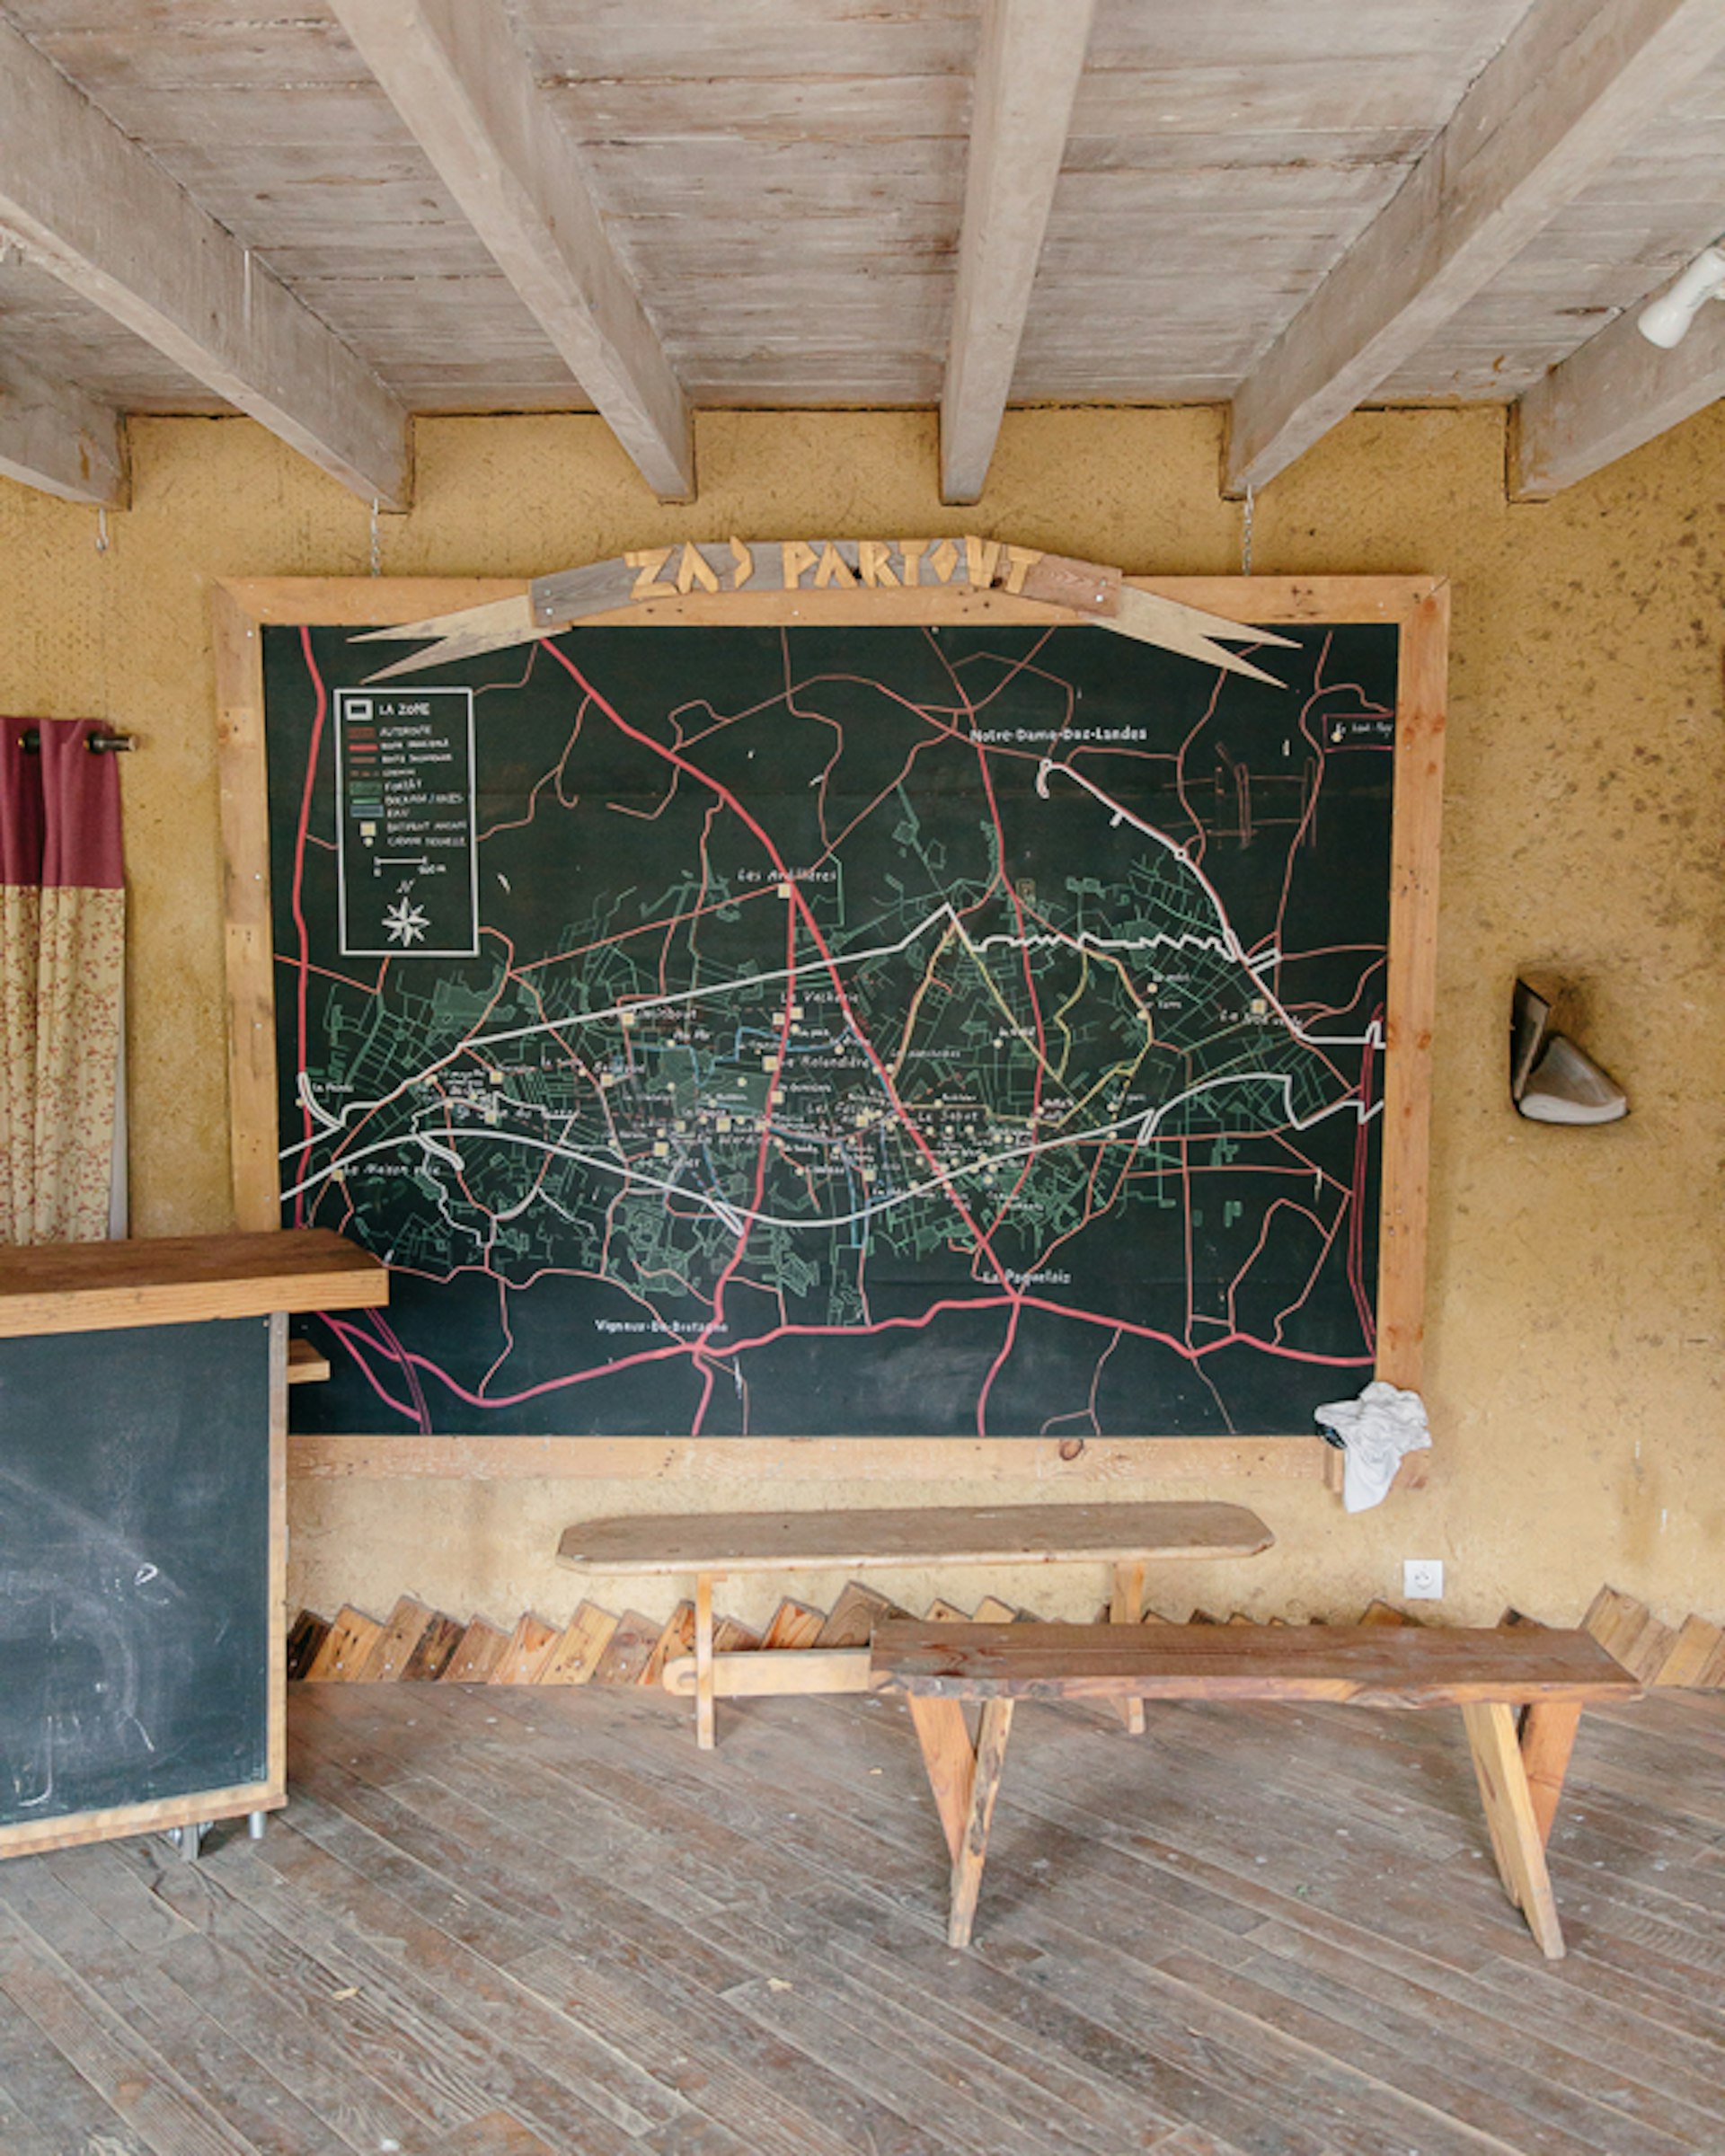 The ZAD reception at La Rolandière, where first-time visitors can receive more information about the ZAD. On the wall is a map which shows the occupied zone and the different collectives along the territory.